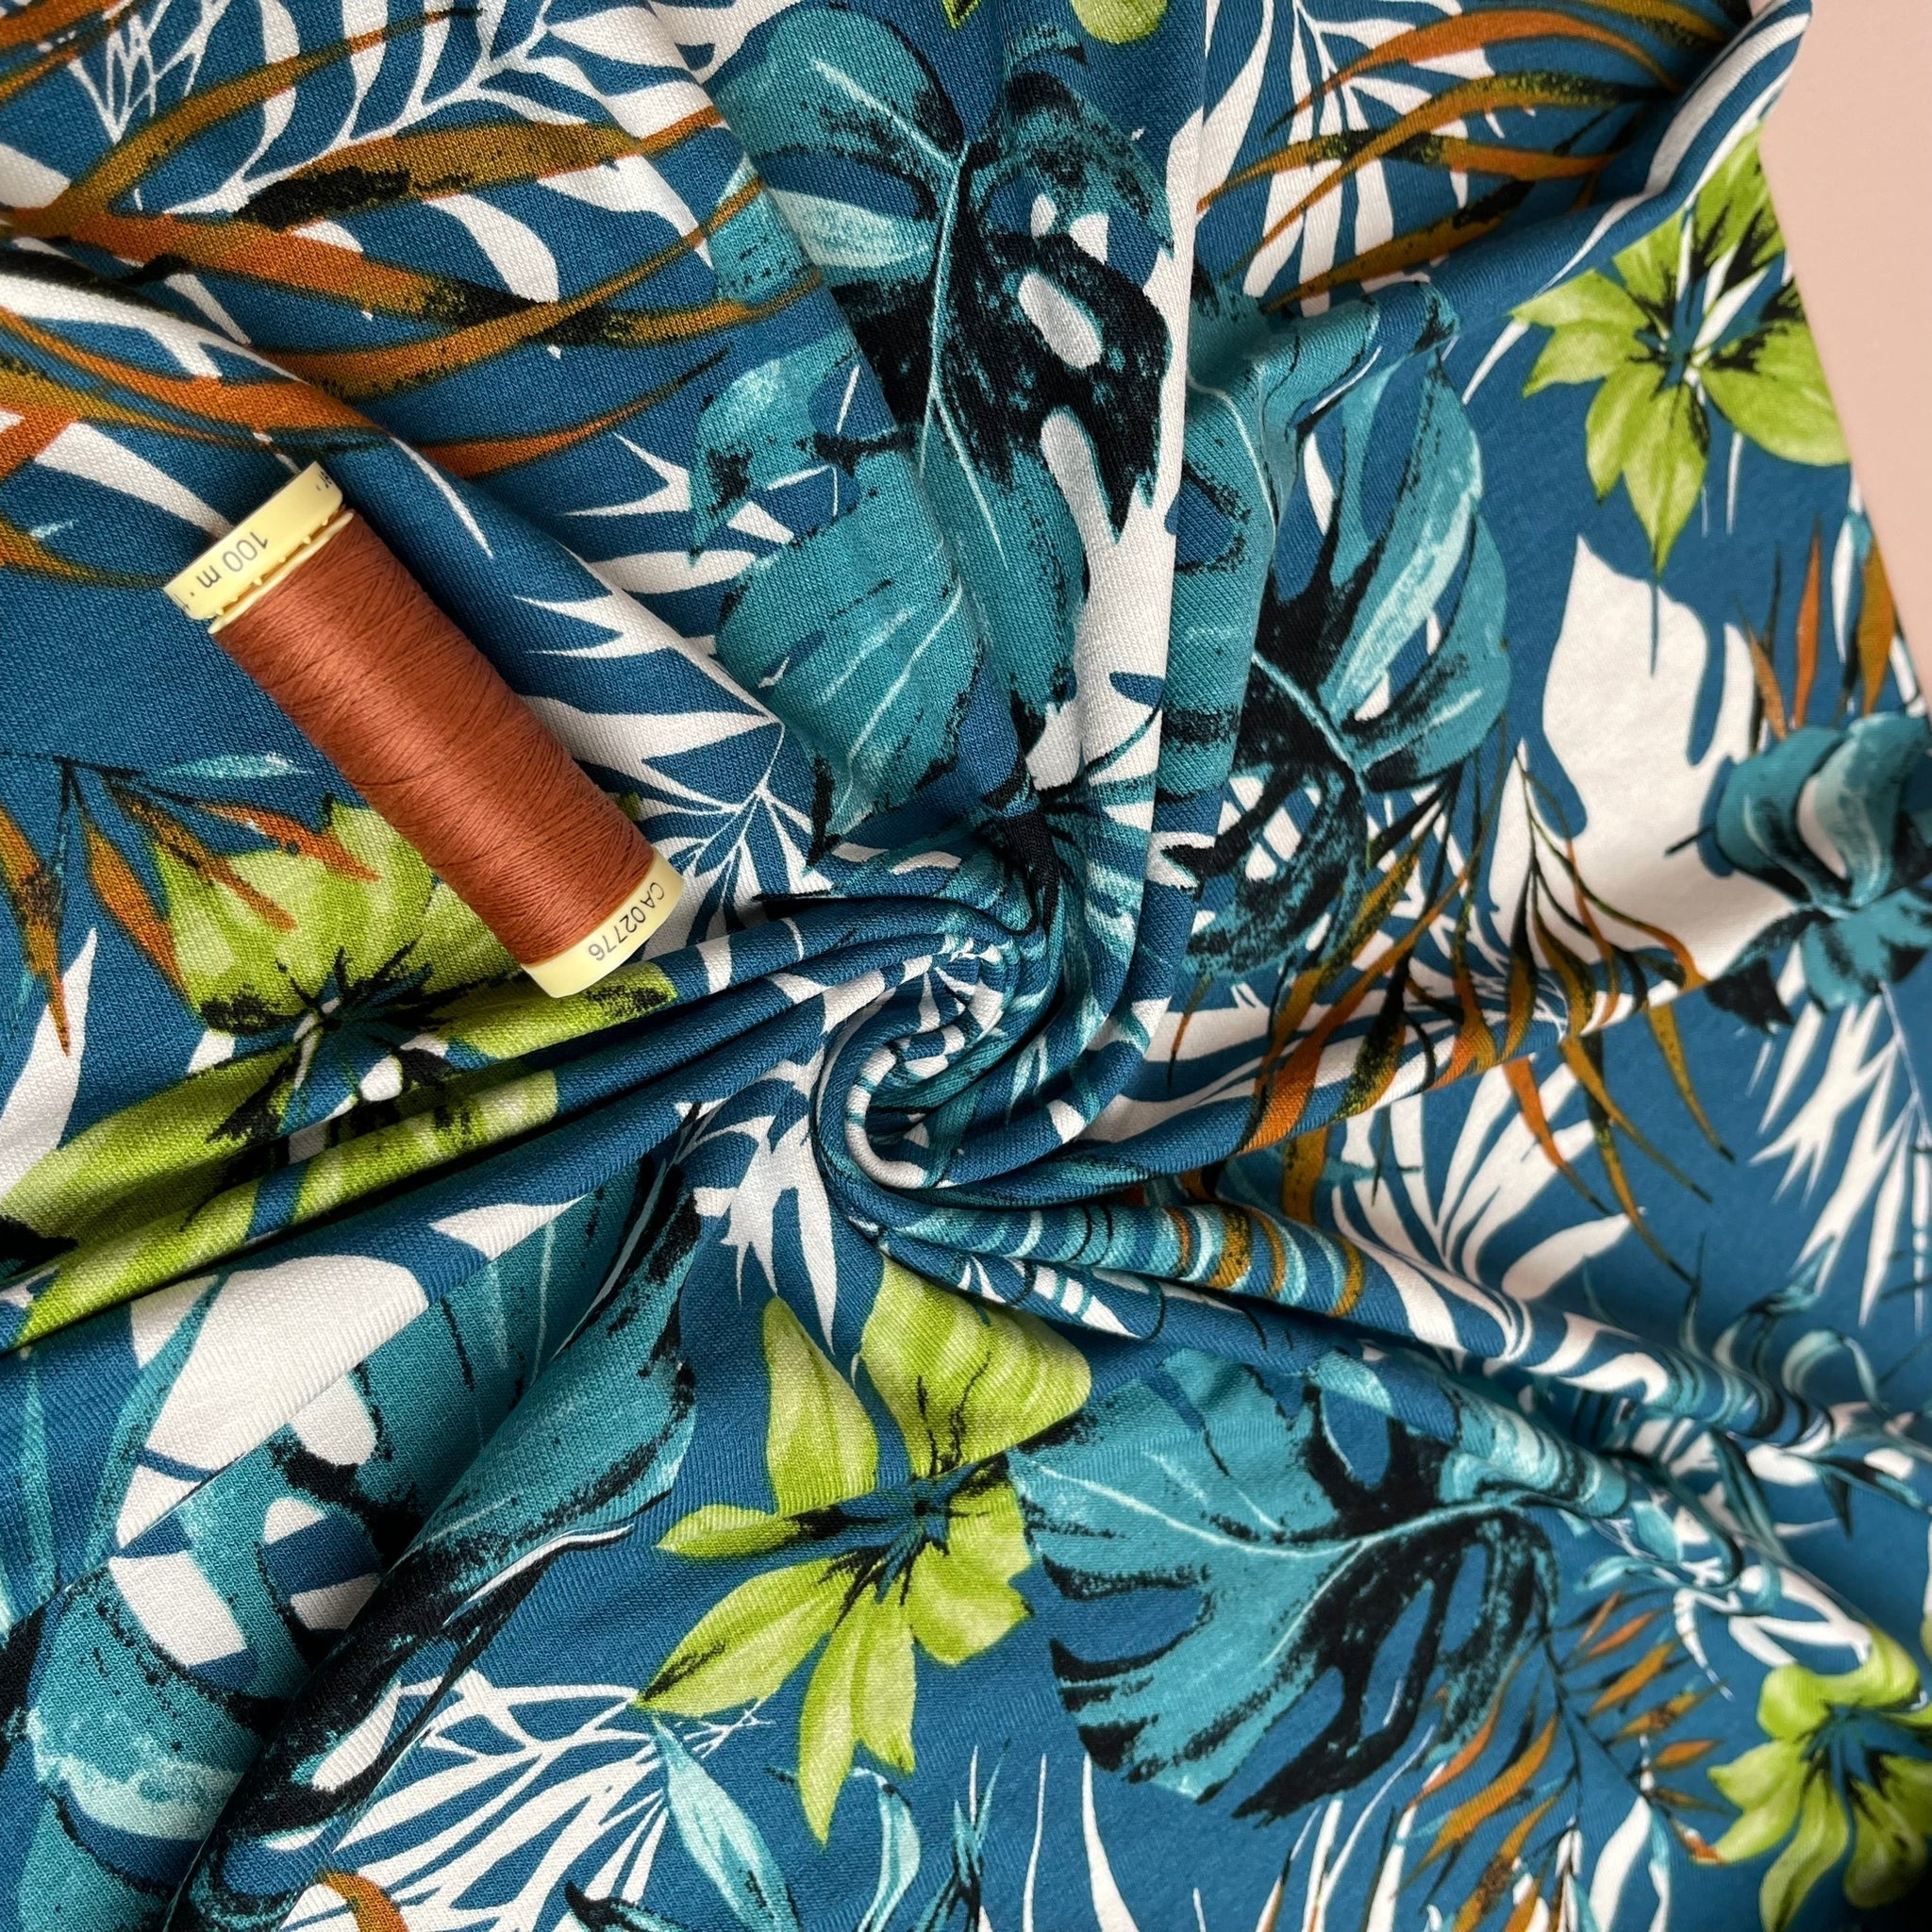 REMNANT 0.56 Metres - Tropical Leaves Viscose Jersey Fabric